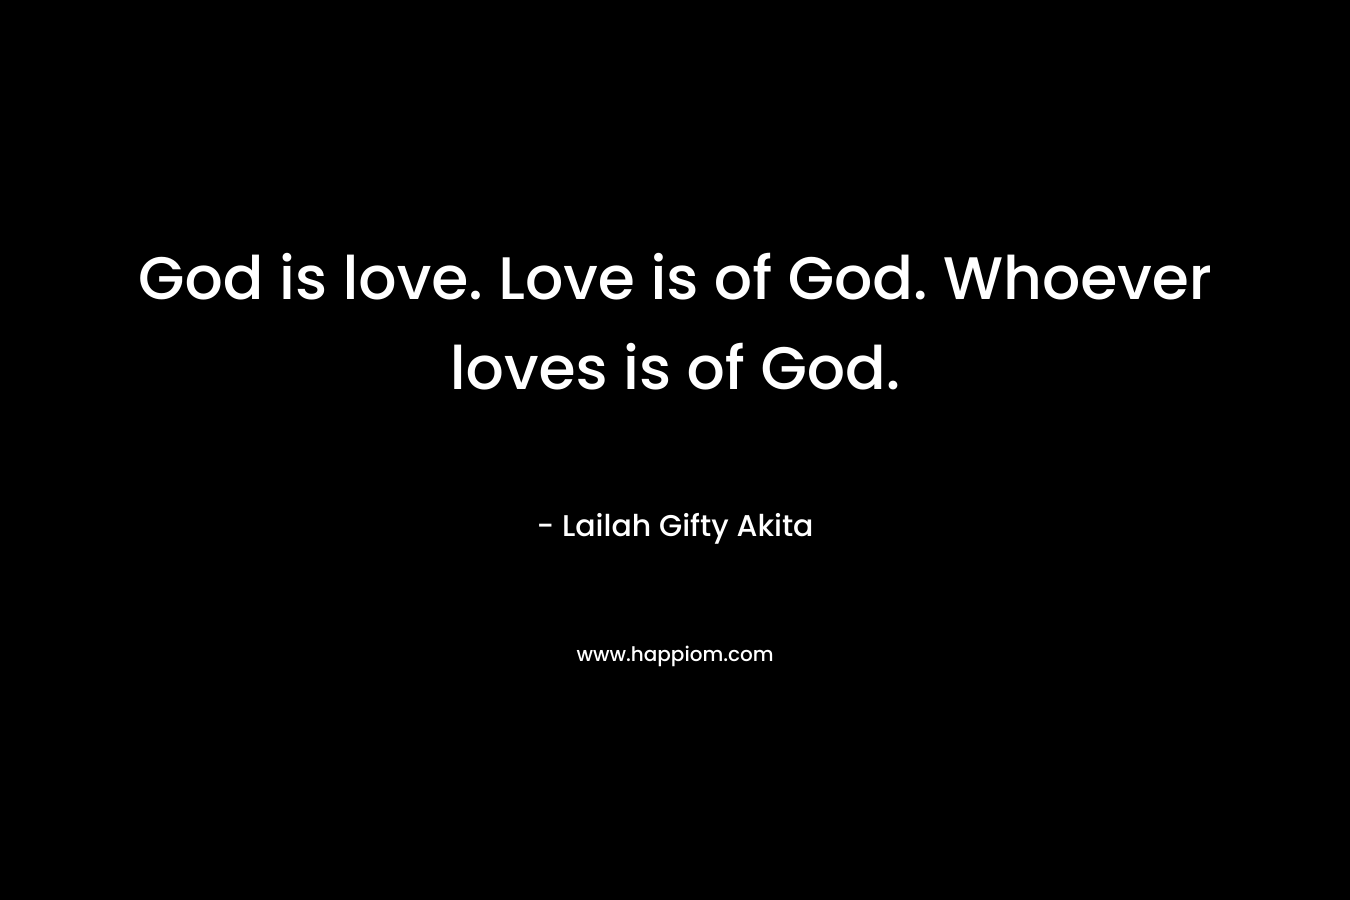 God is love. Love is of God. Whoever loves is of God.